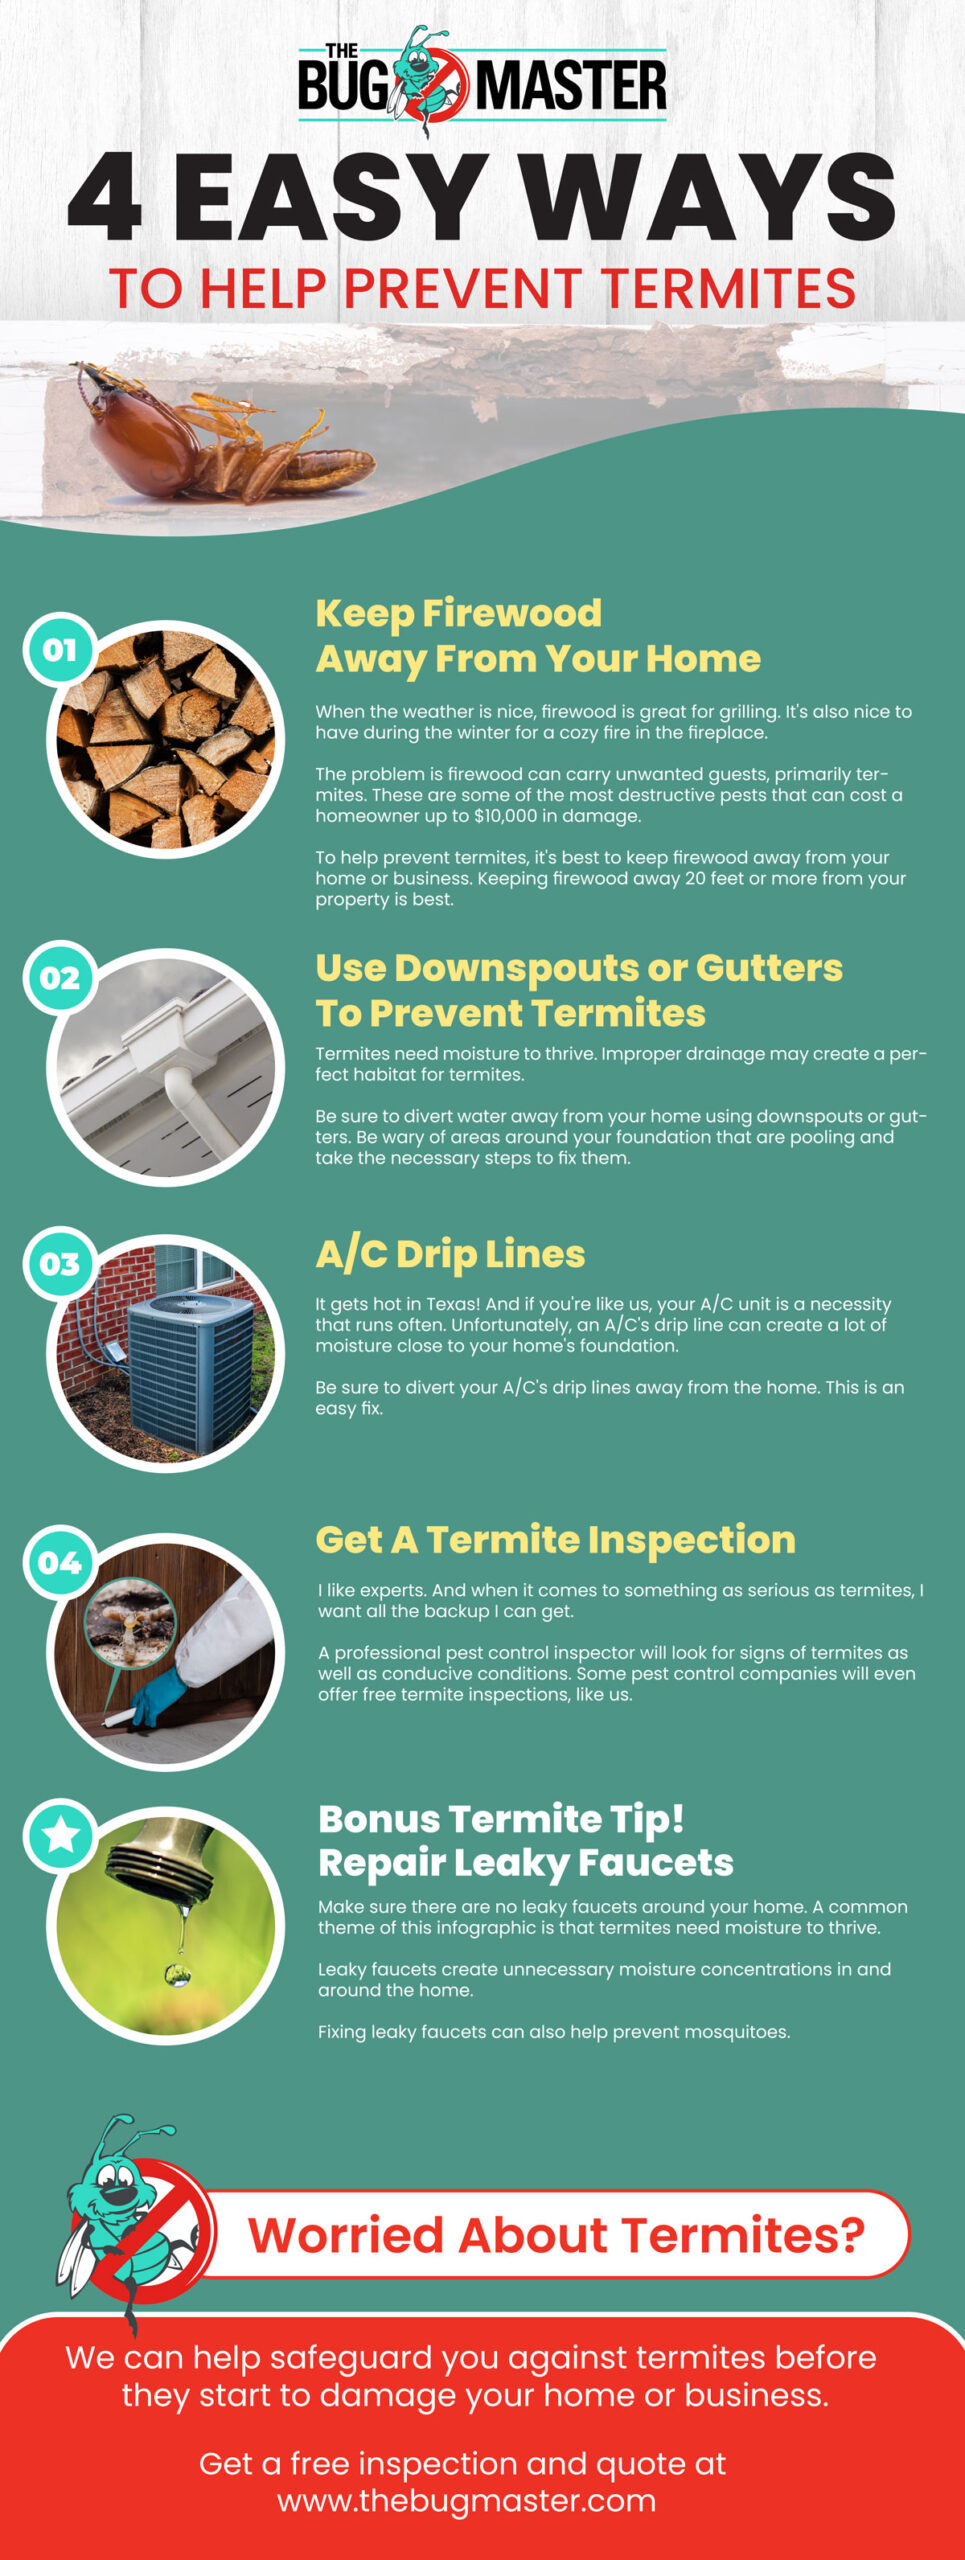 Infographic showing 4 easy ways to prevent termites